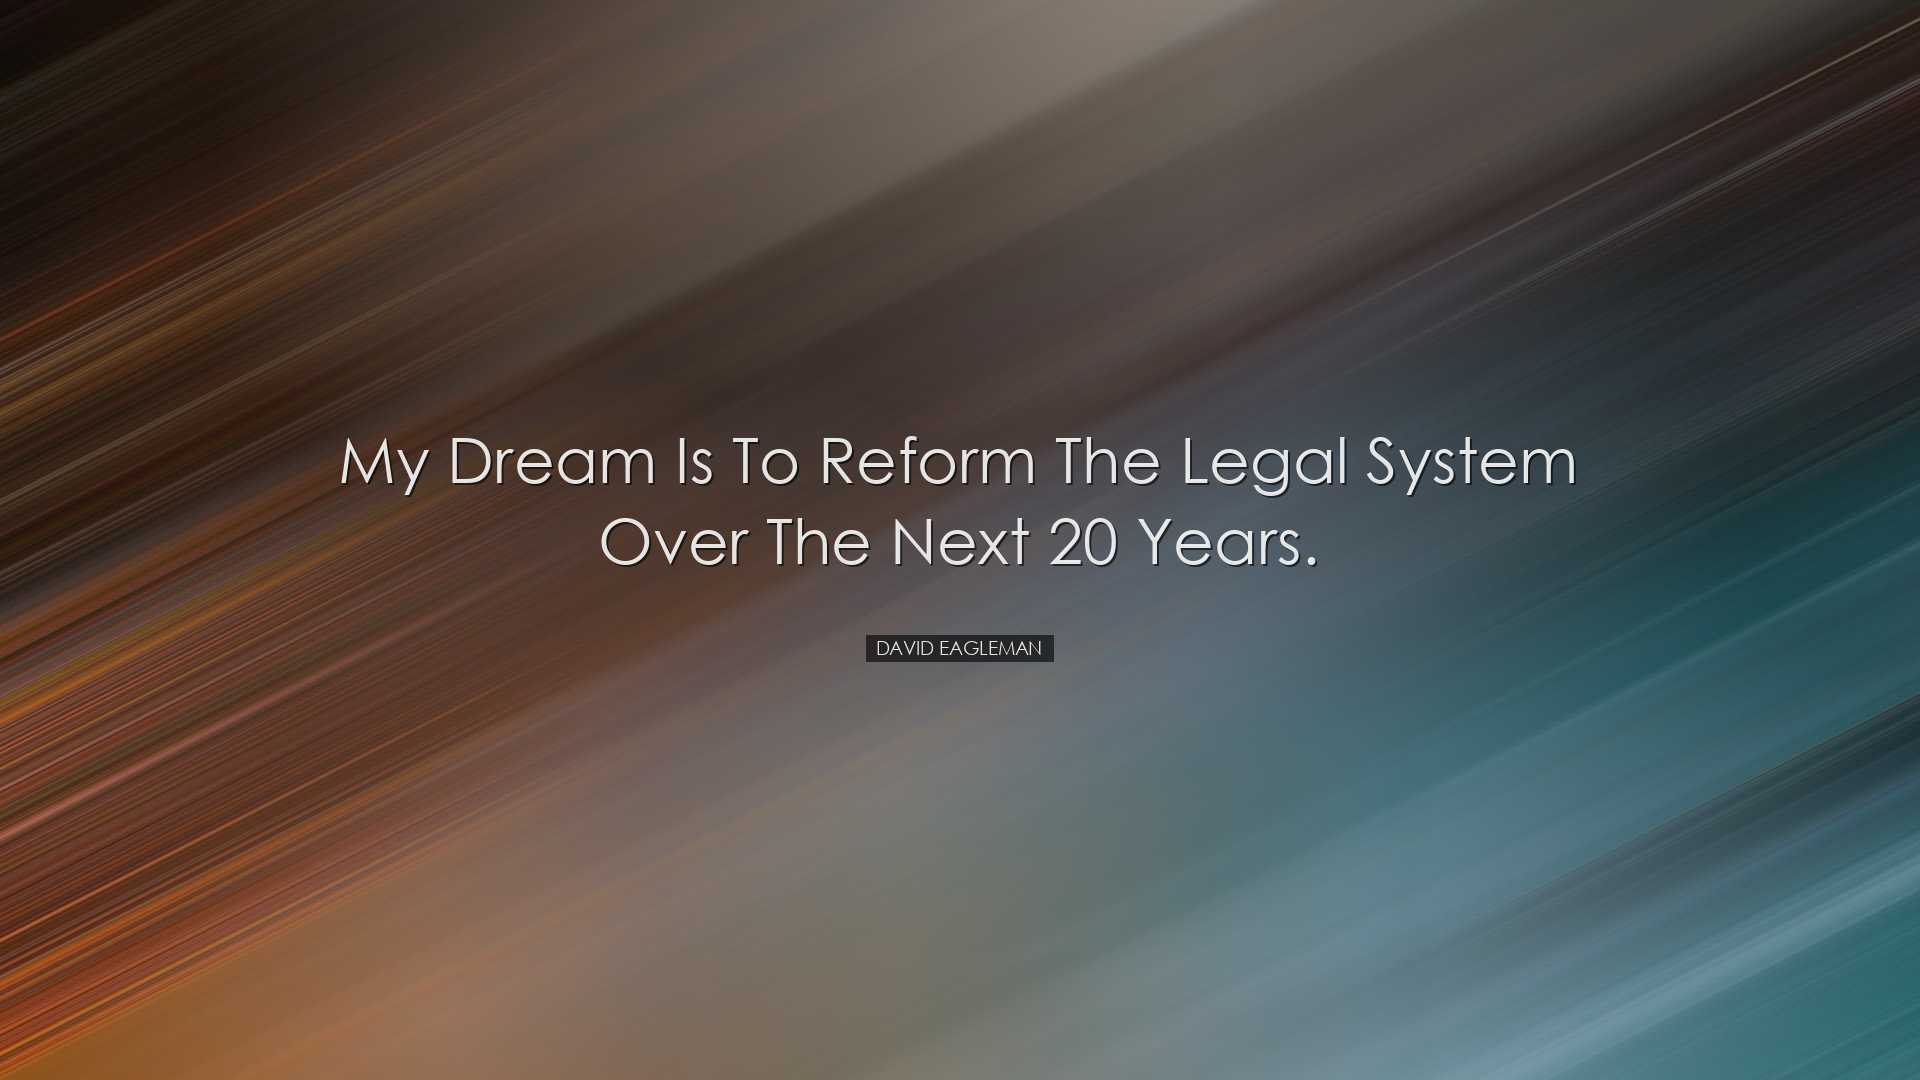 My dream is to reform the legal system over the next 20 years. - D